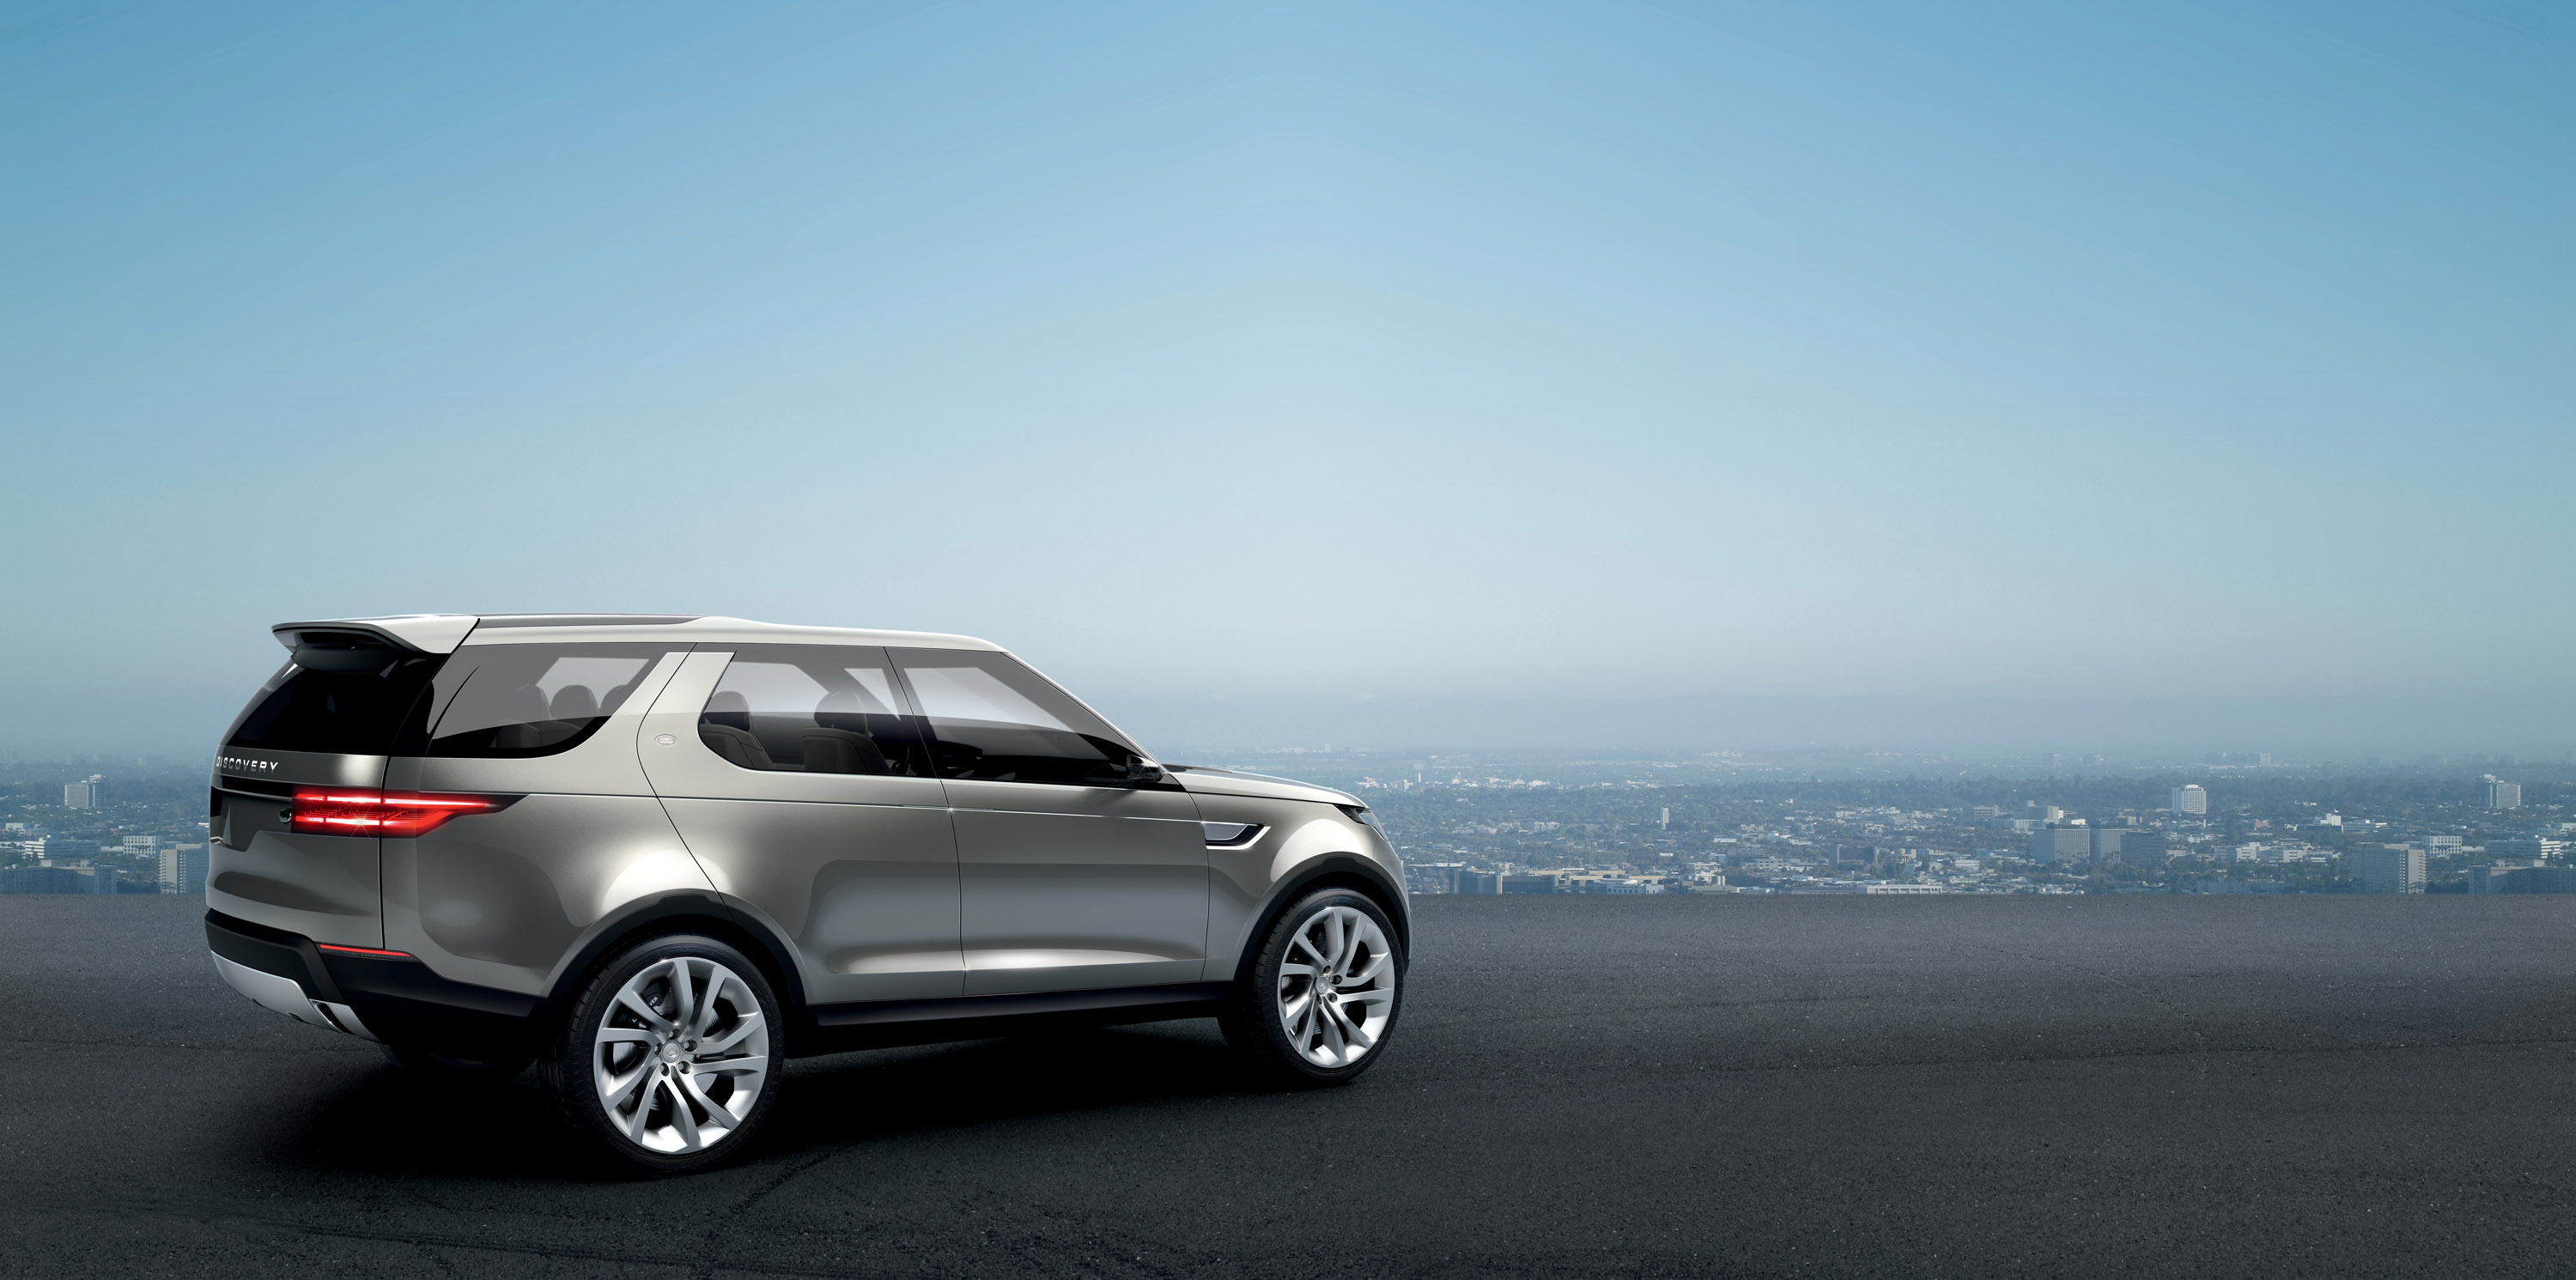 2014 Land Rover Discovery Vision Concept - HD Pictures @ carsinvasion.com